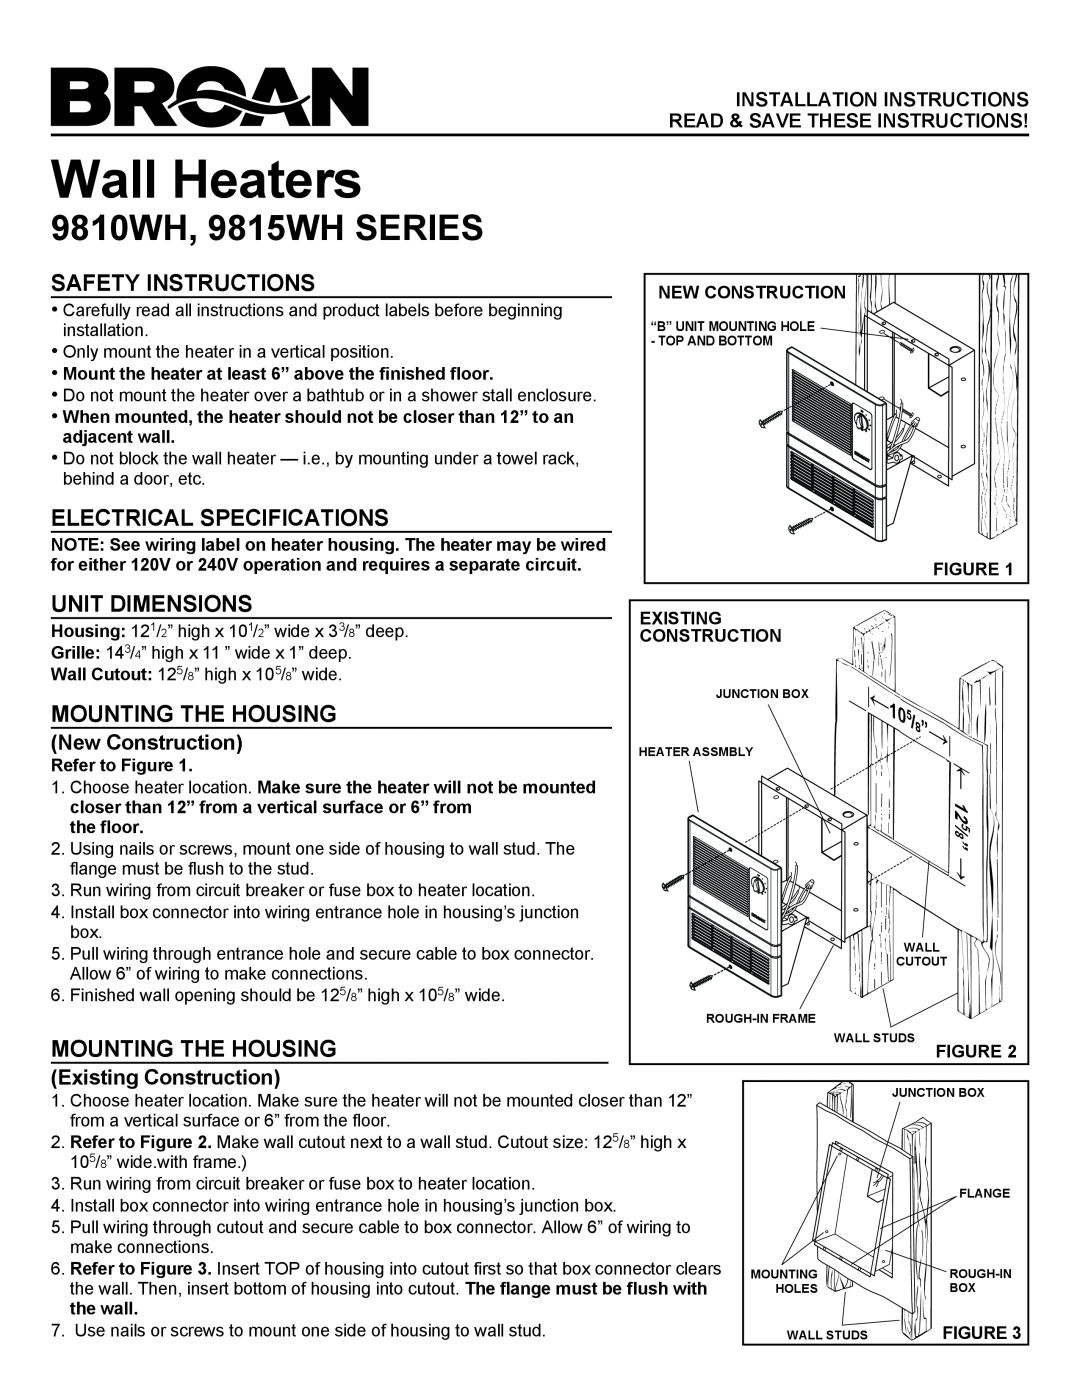 Broan installation instructions Wall Heaters, 9810WH, 9815WH SERIES, Safety Instructions, Electrical Specifications 